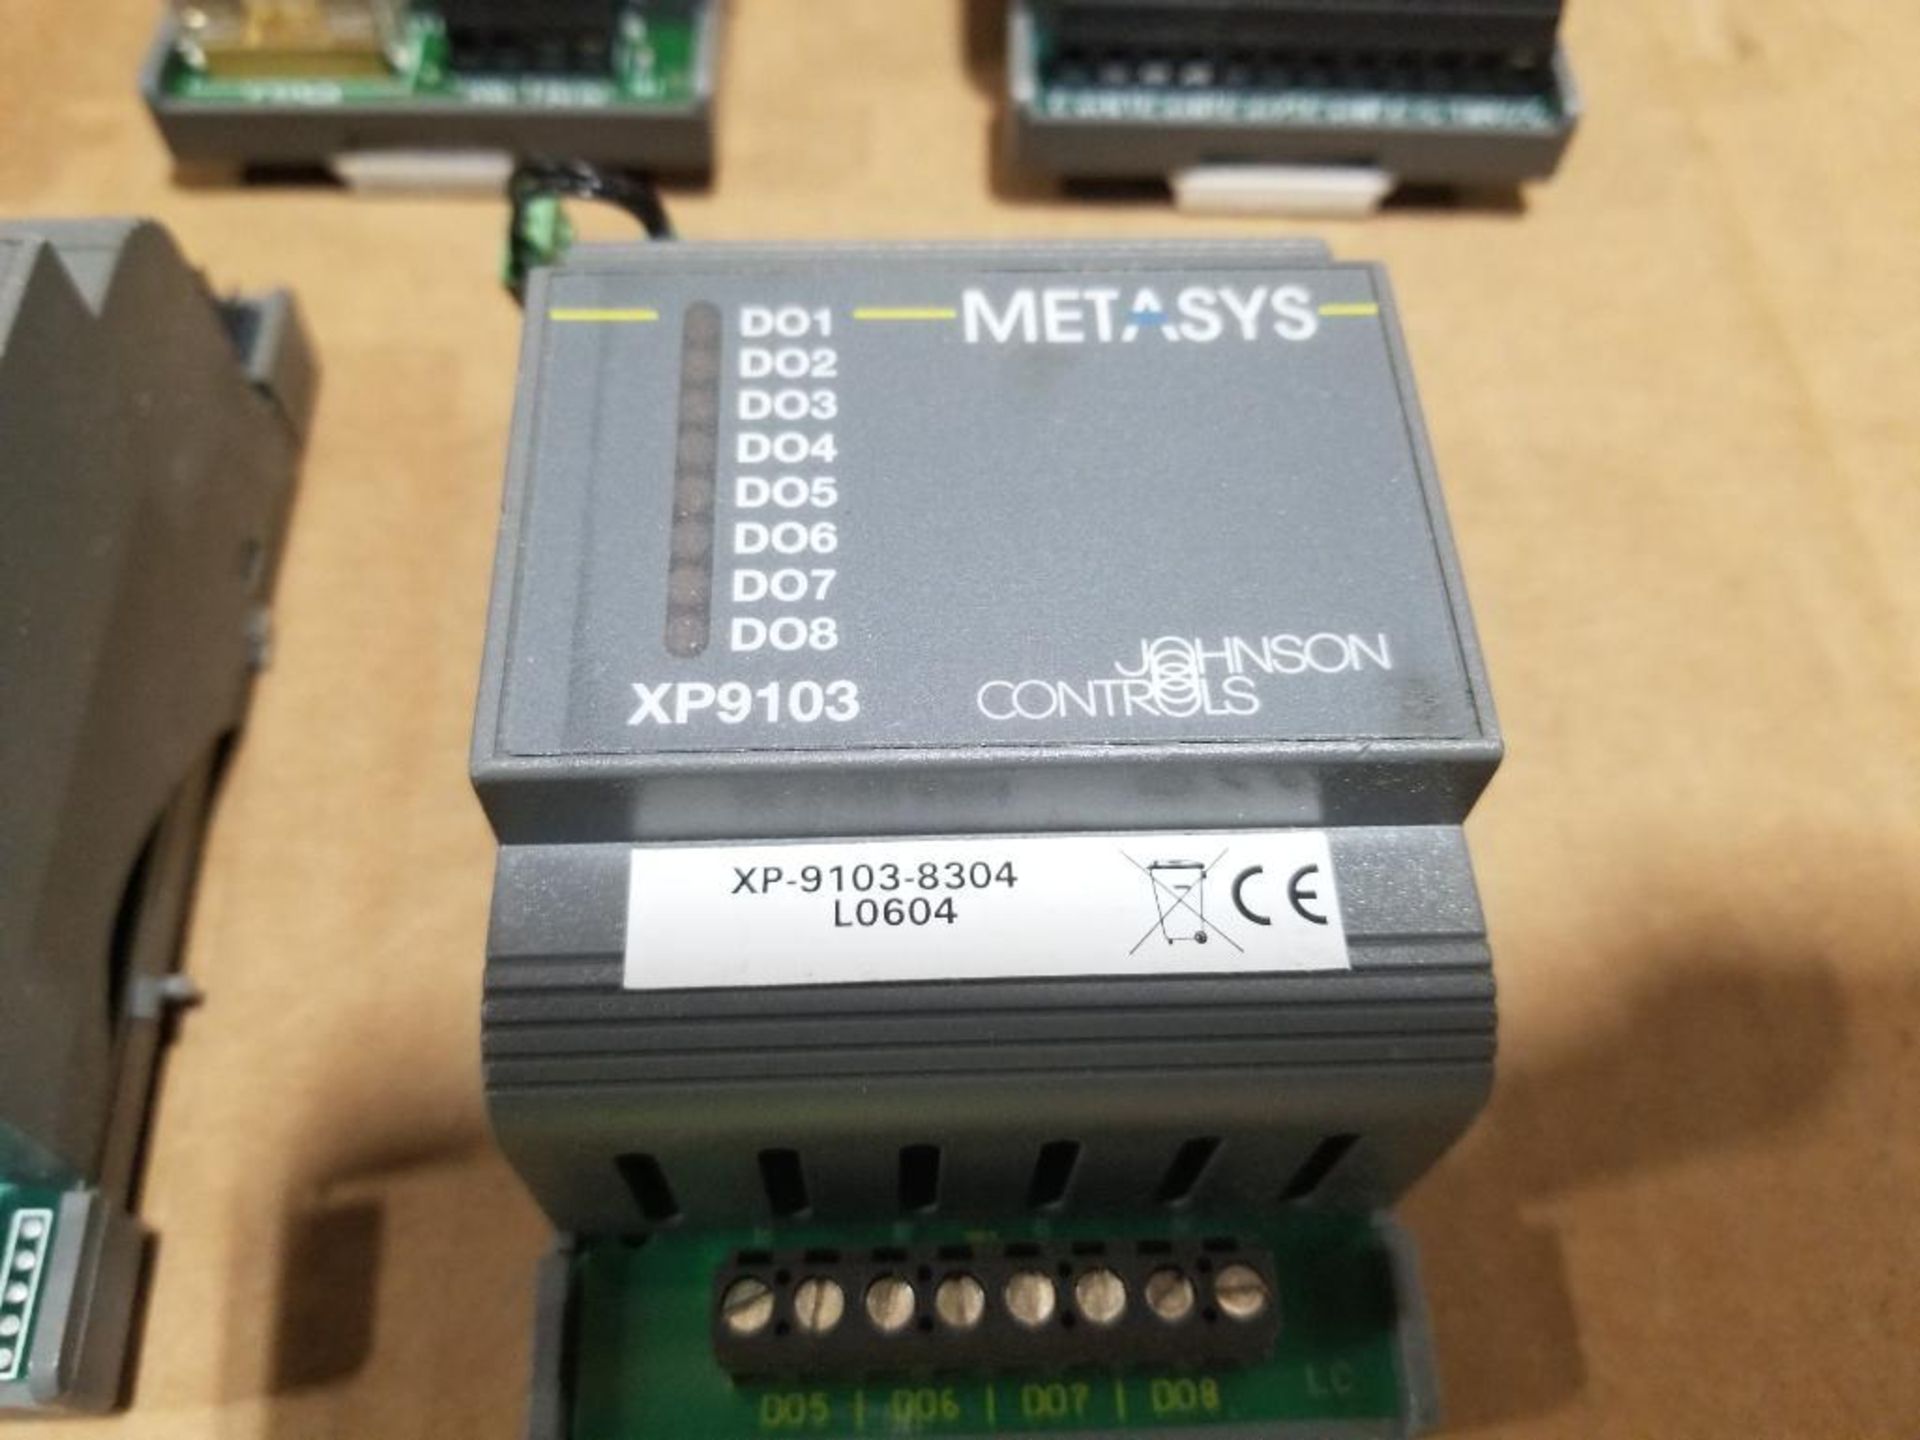 Qty 5 - Johnson Controls Metasys controllers. - Image 2 of 6